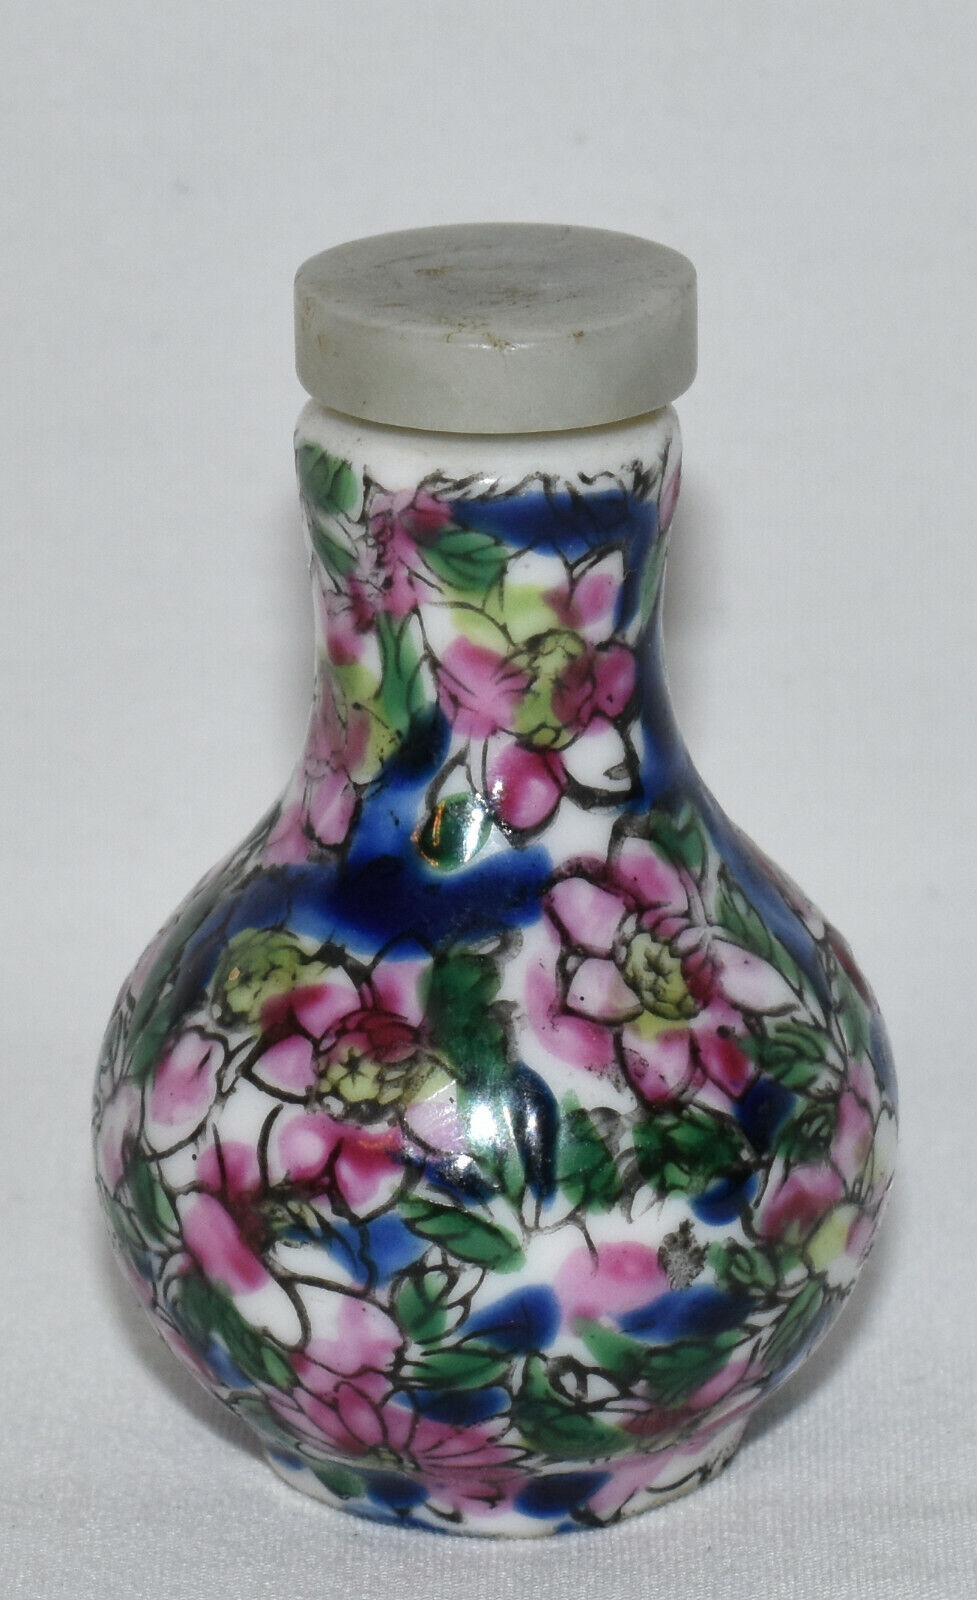 Antique Chinese Porcelain Snuff Bottle Hand Painted Enameled Snuff Bottle Signed